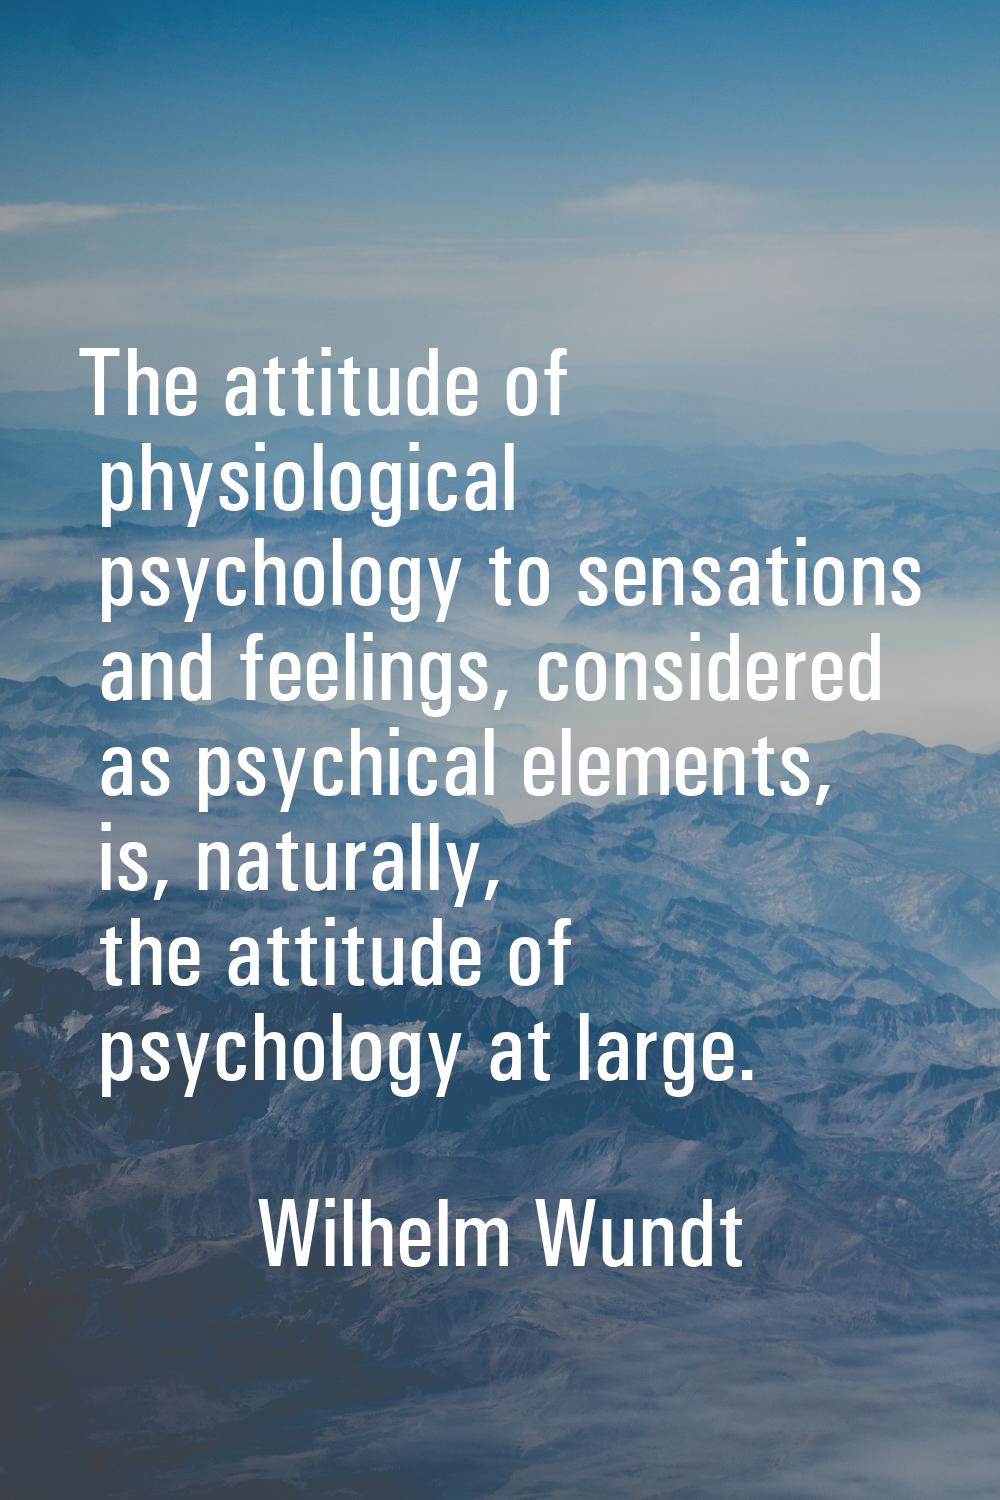 The attitude of physiological psychology to sensations and feelings, considered as psychical elemen